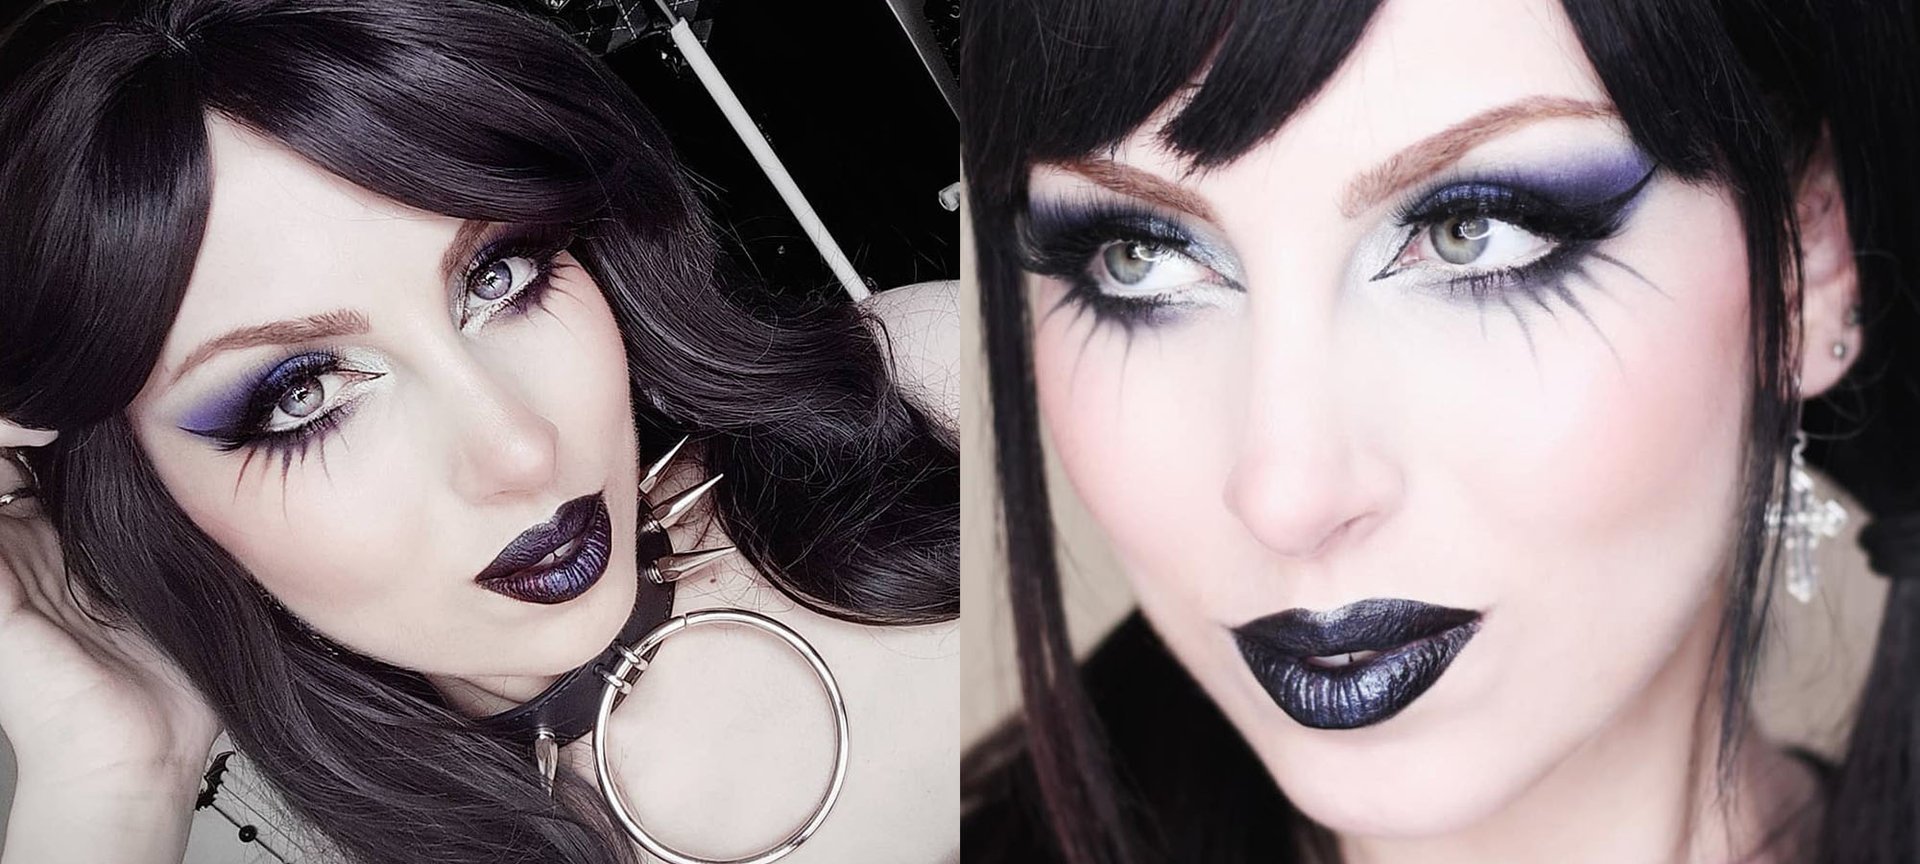 How To Get A Goth Makeup -